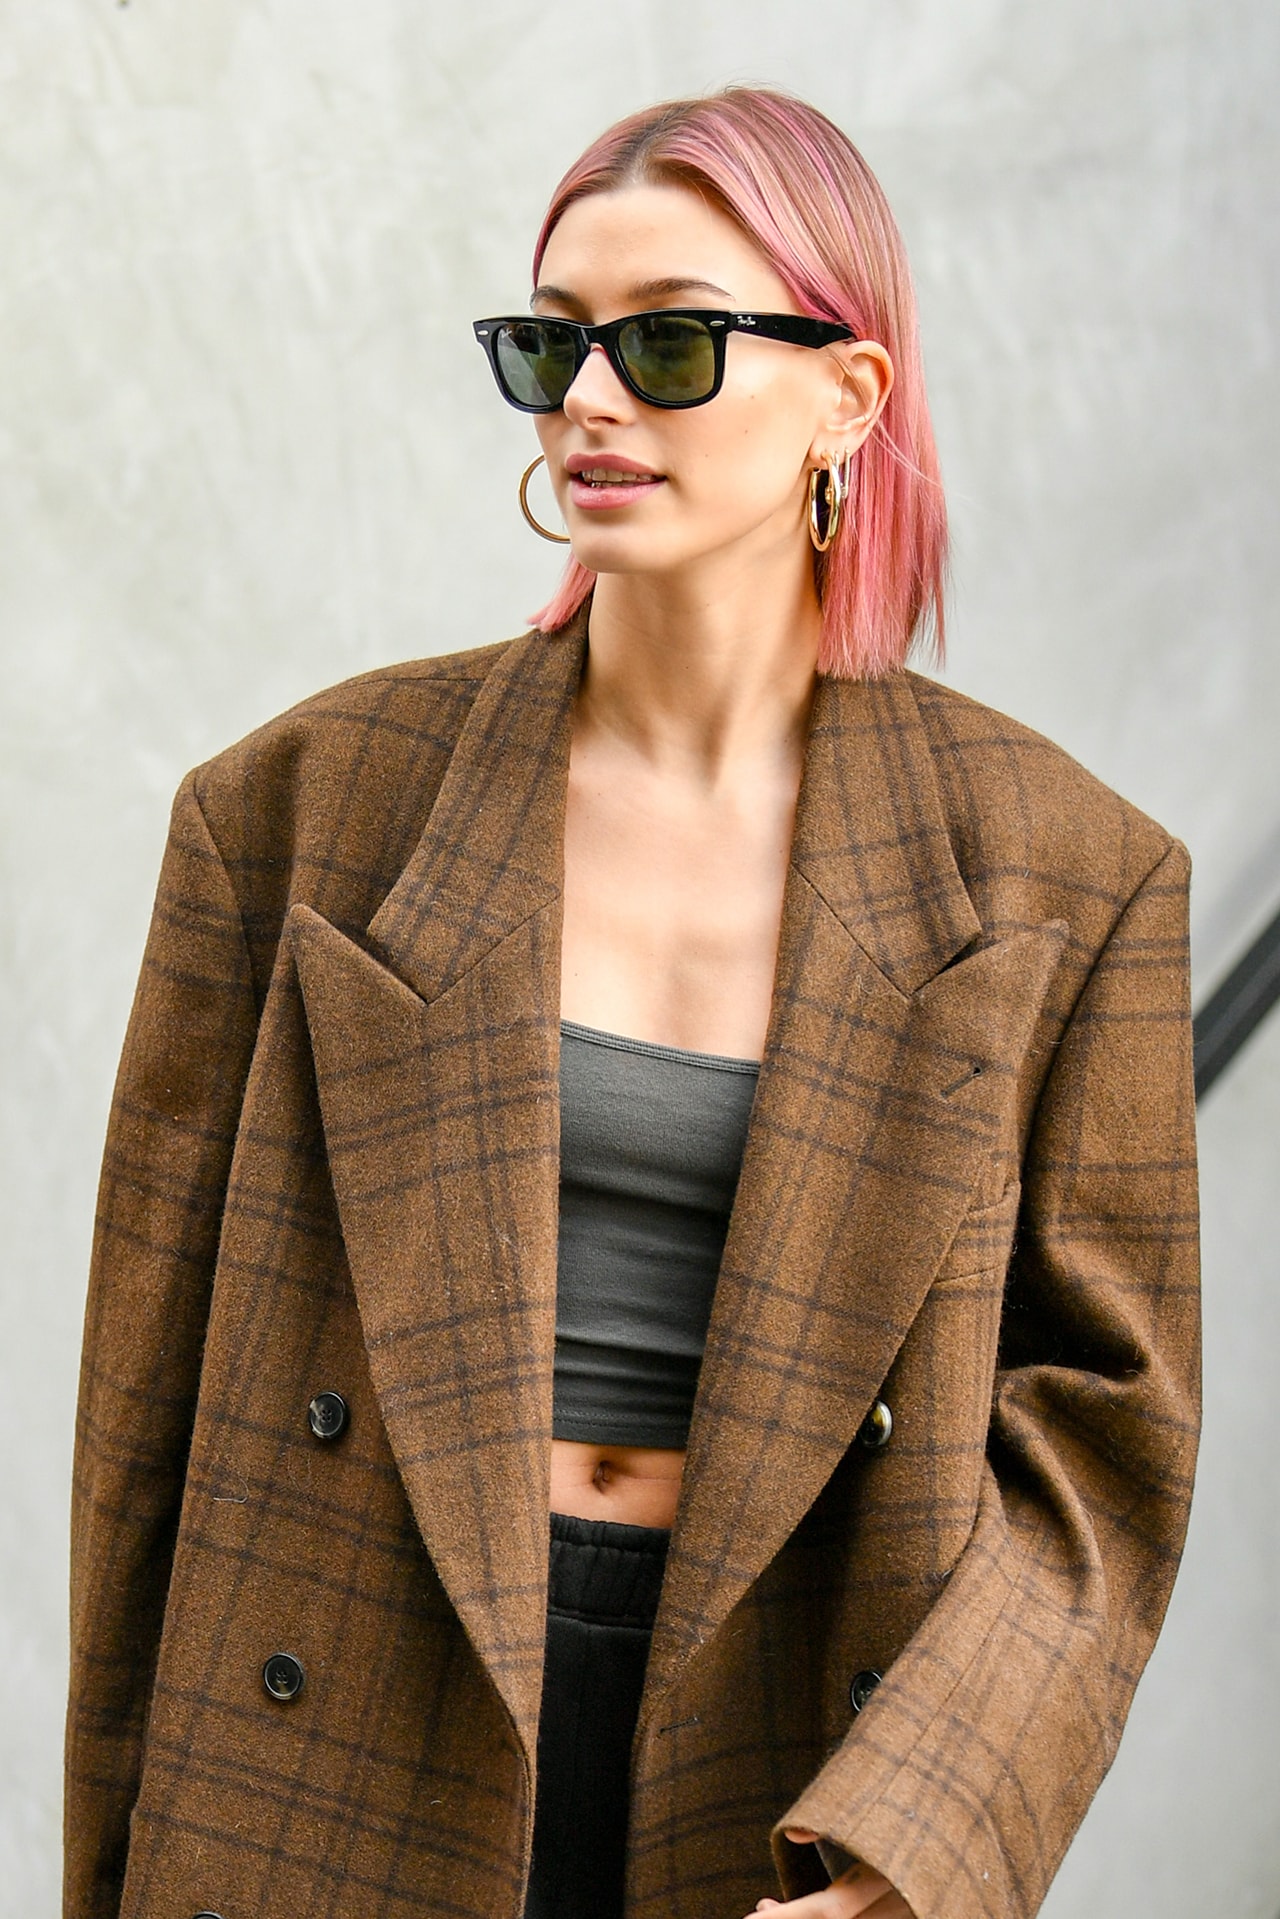 Hailey Bieber's Blunt Mini-Bob Is One of This Year's Biggest